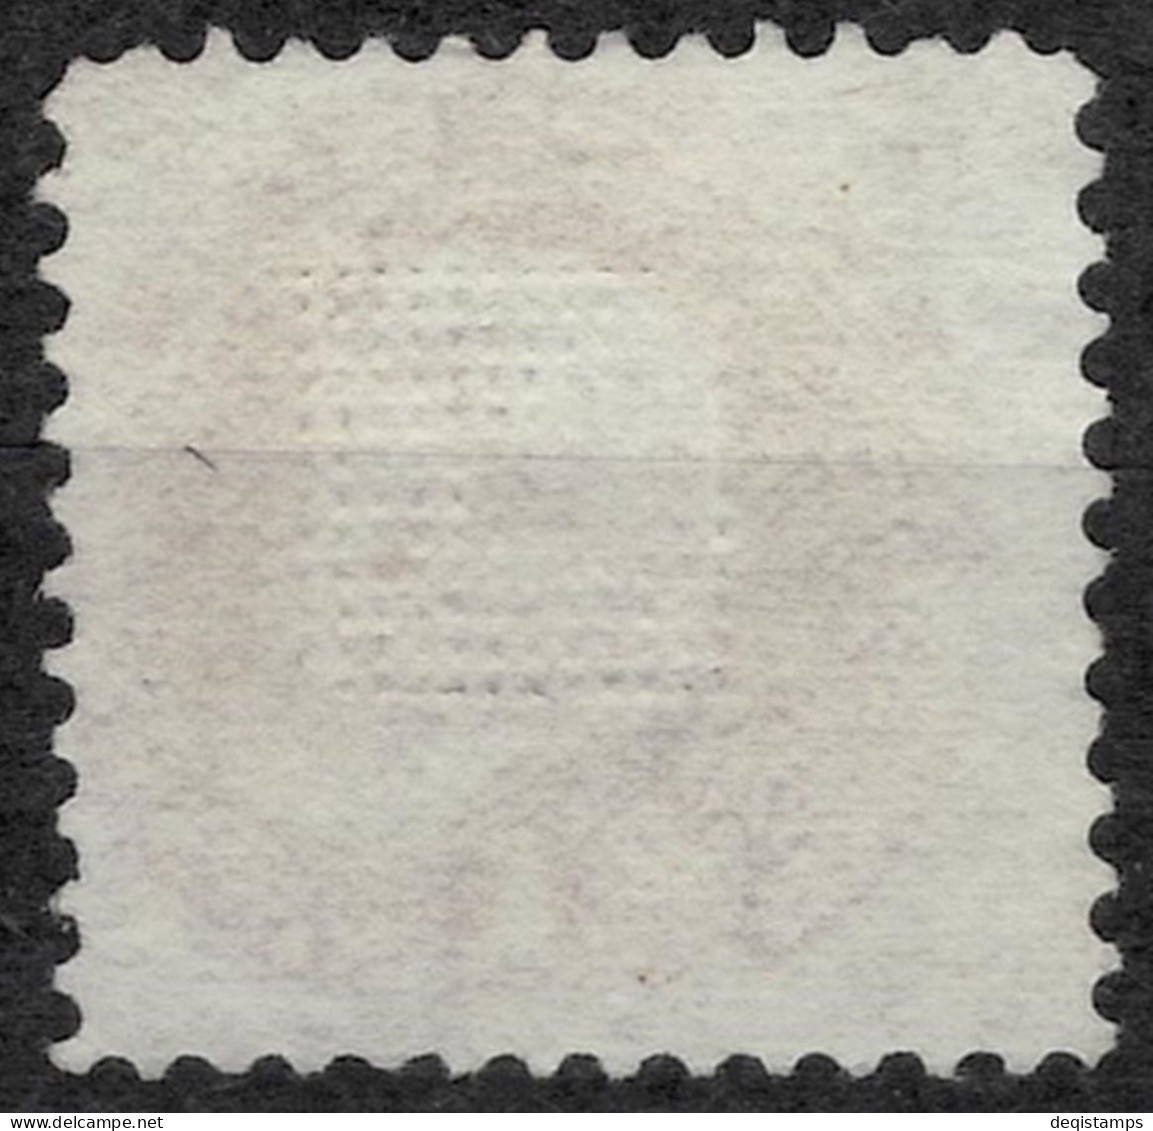 USA 1890/93 1c  Benjamin Franklin - Grill About 9½ X 9mm  MNG Stamp - Neufs